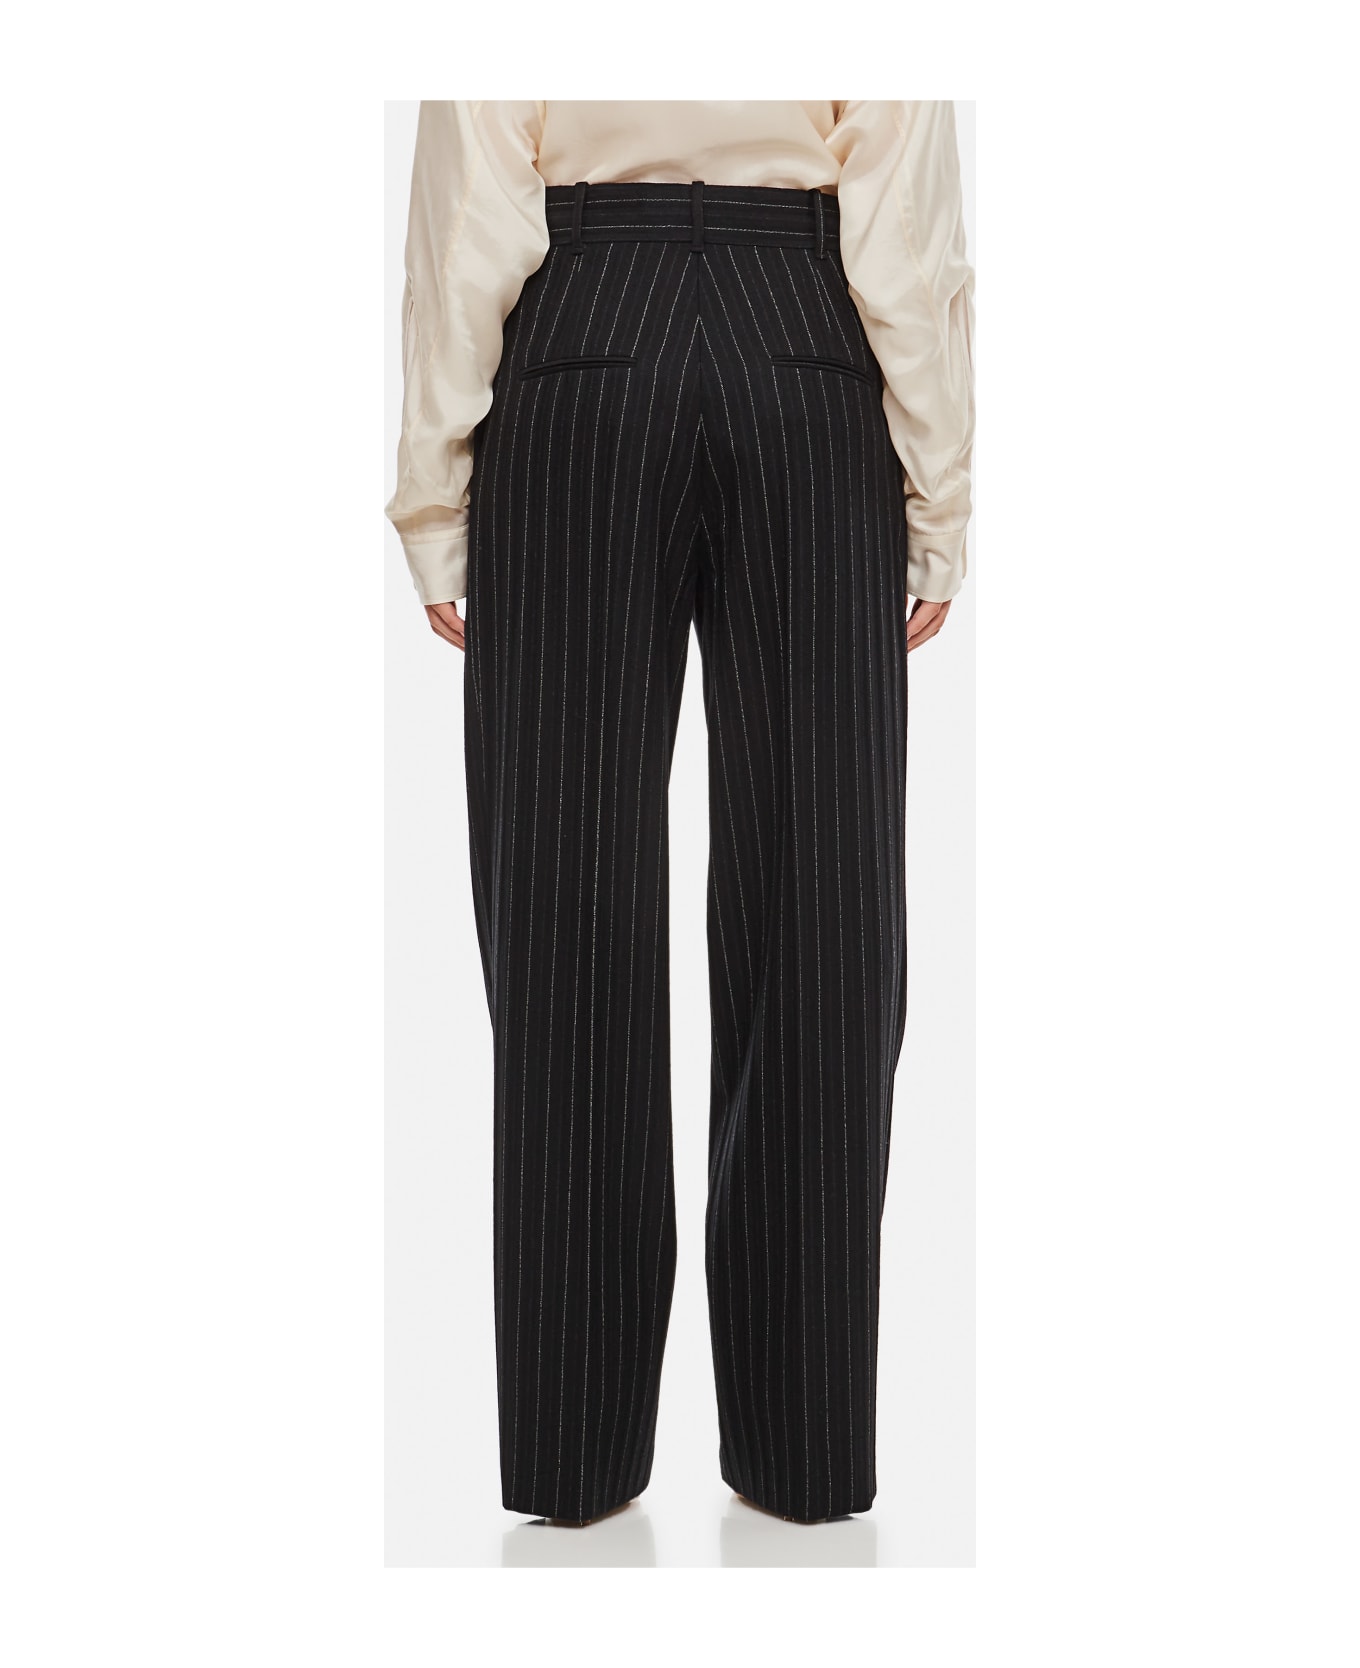 Quira Wool Suit Trousers - Black ボトムス